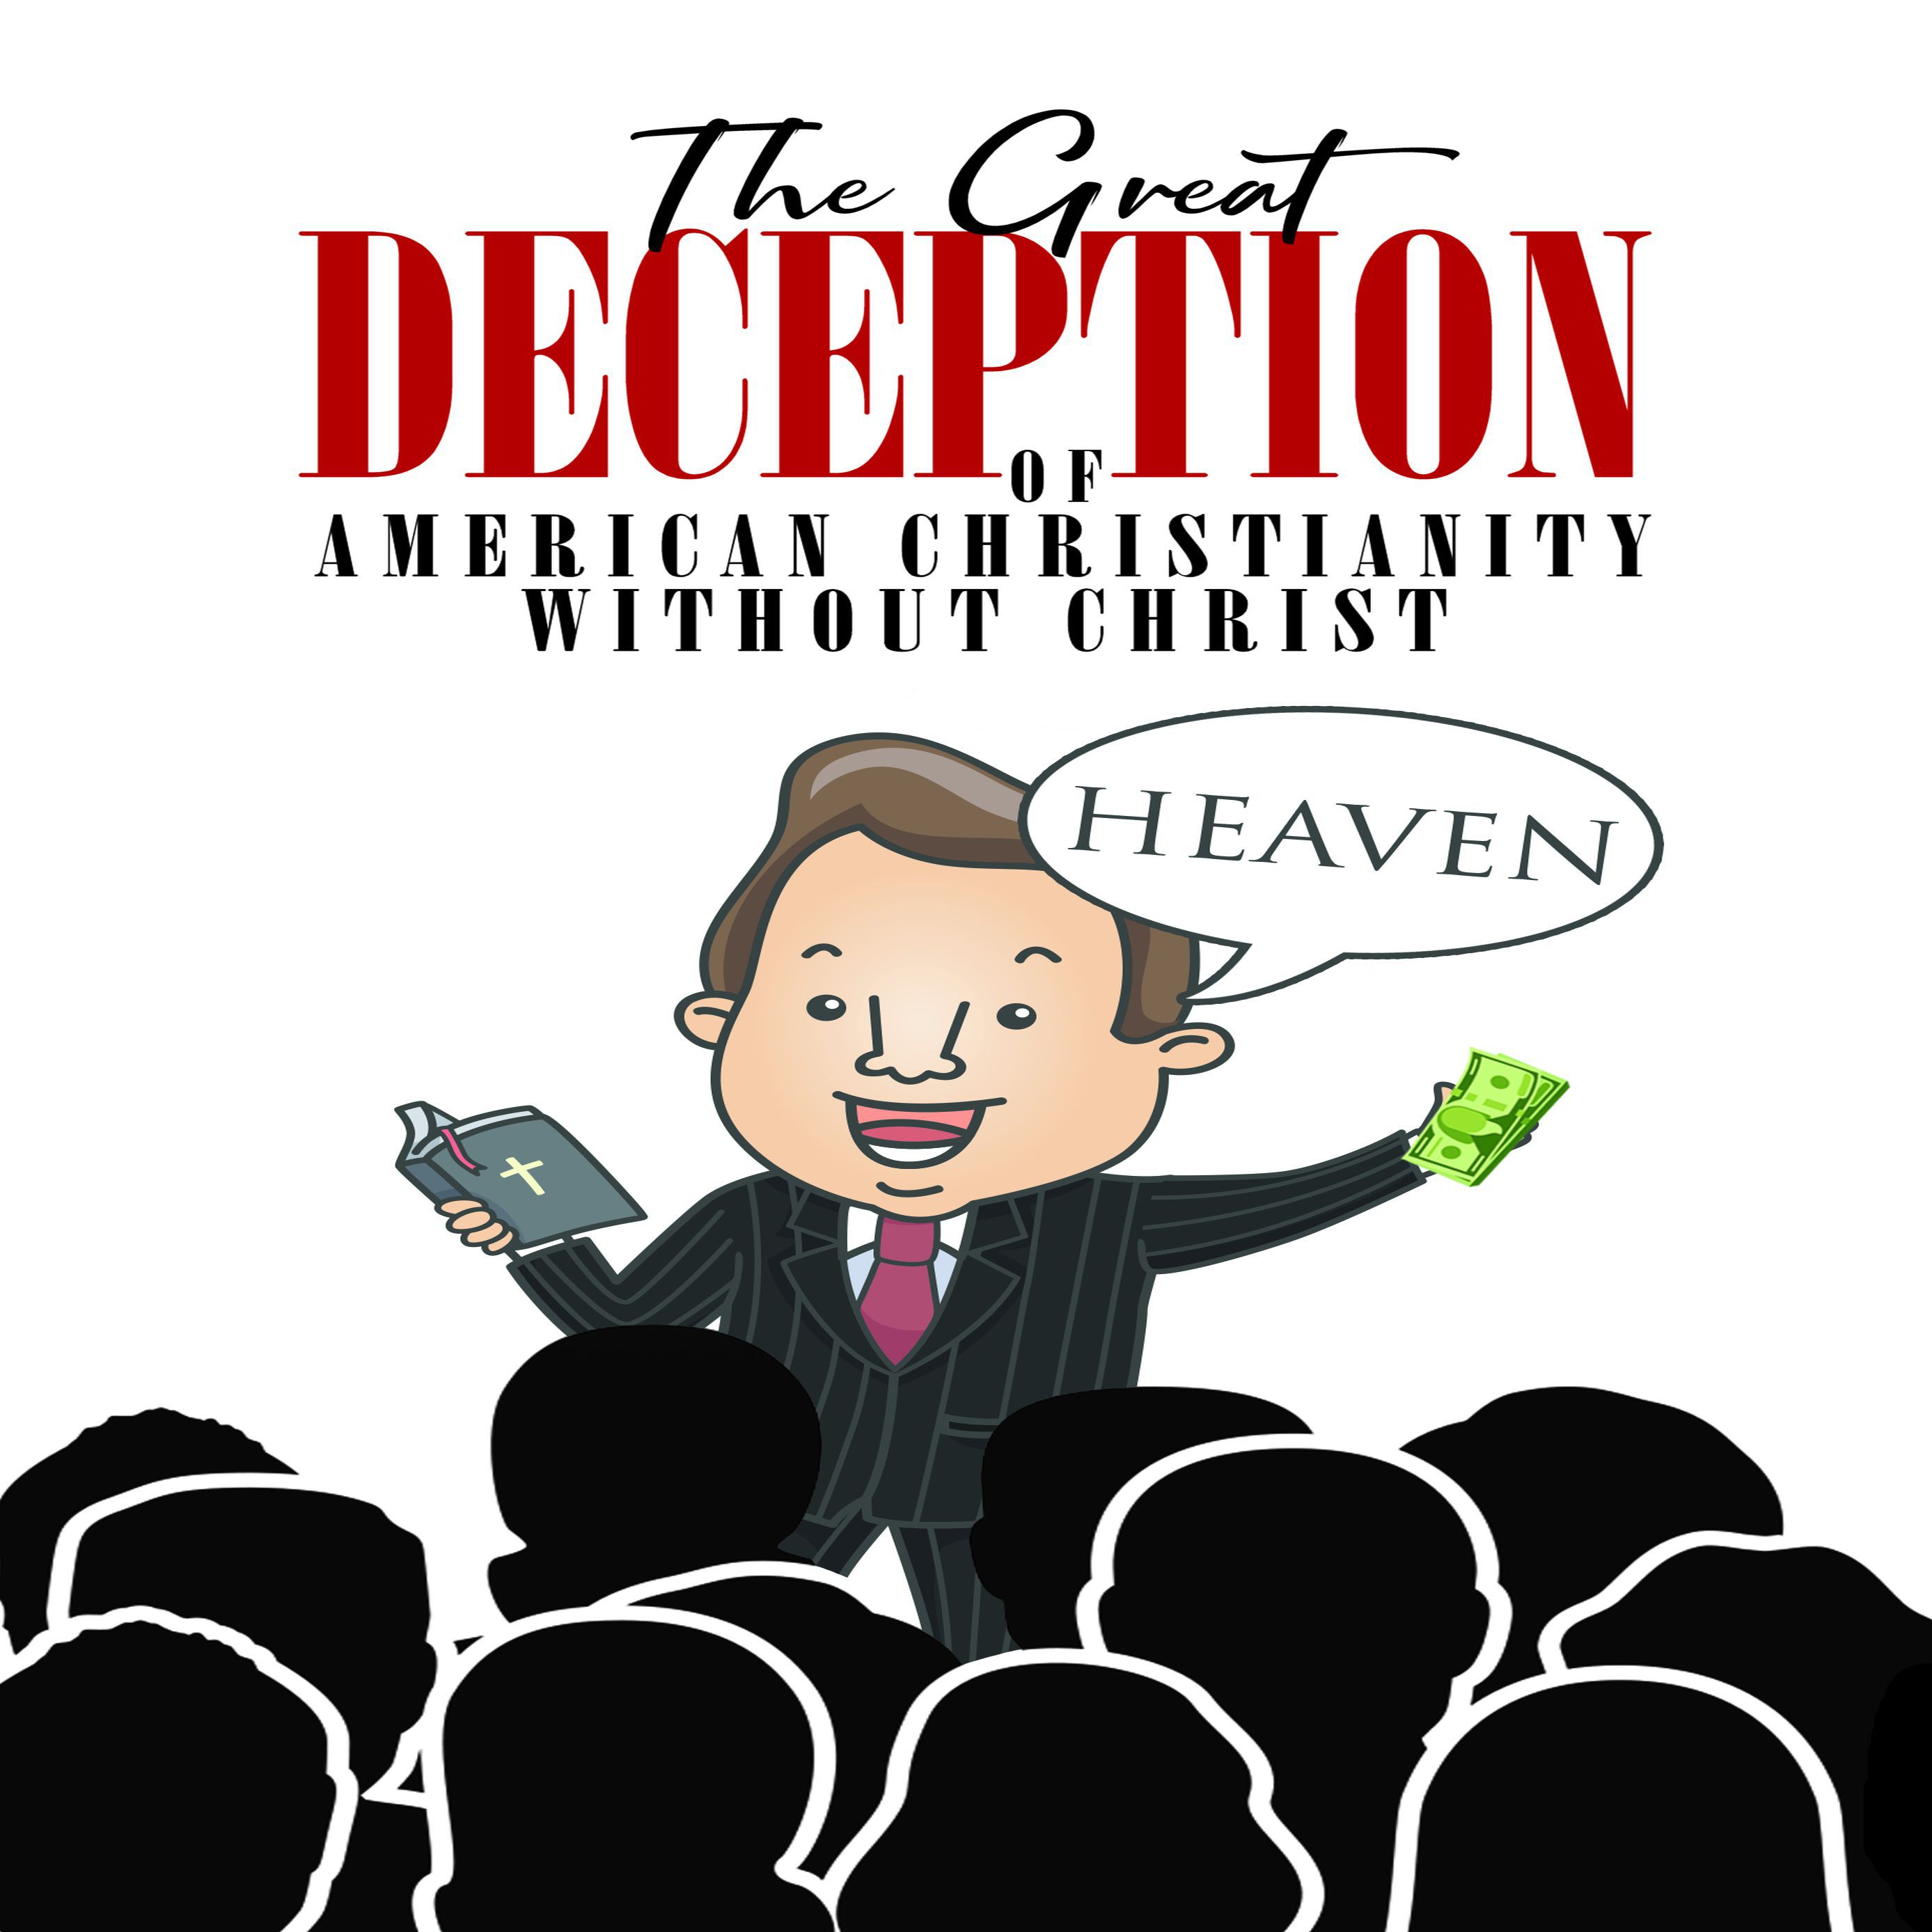 The Great Deception of American Christianity